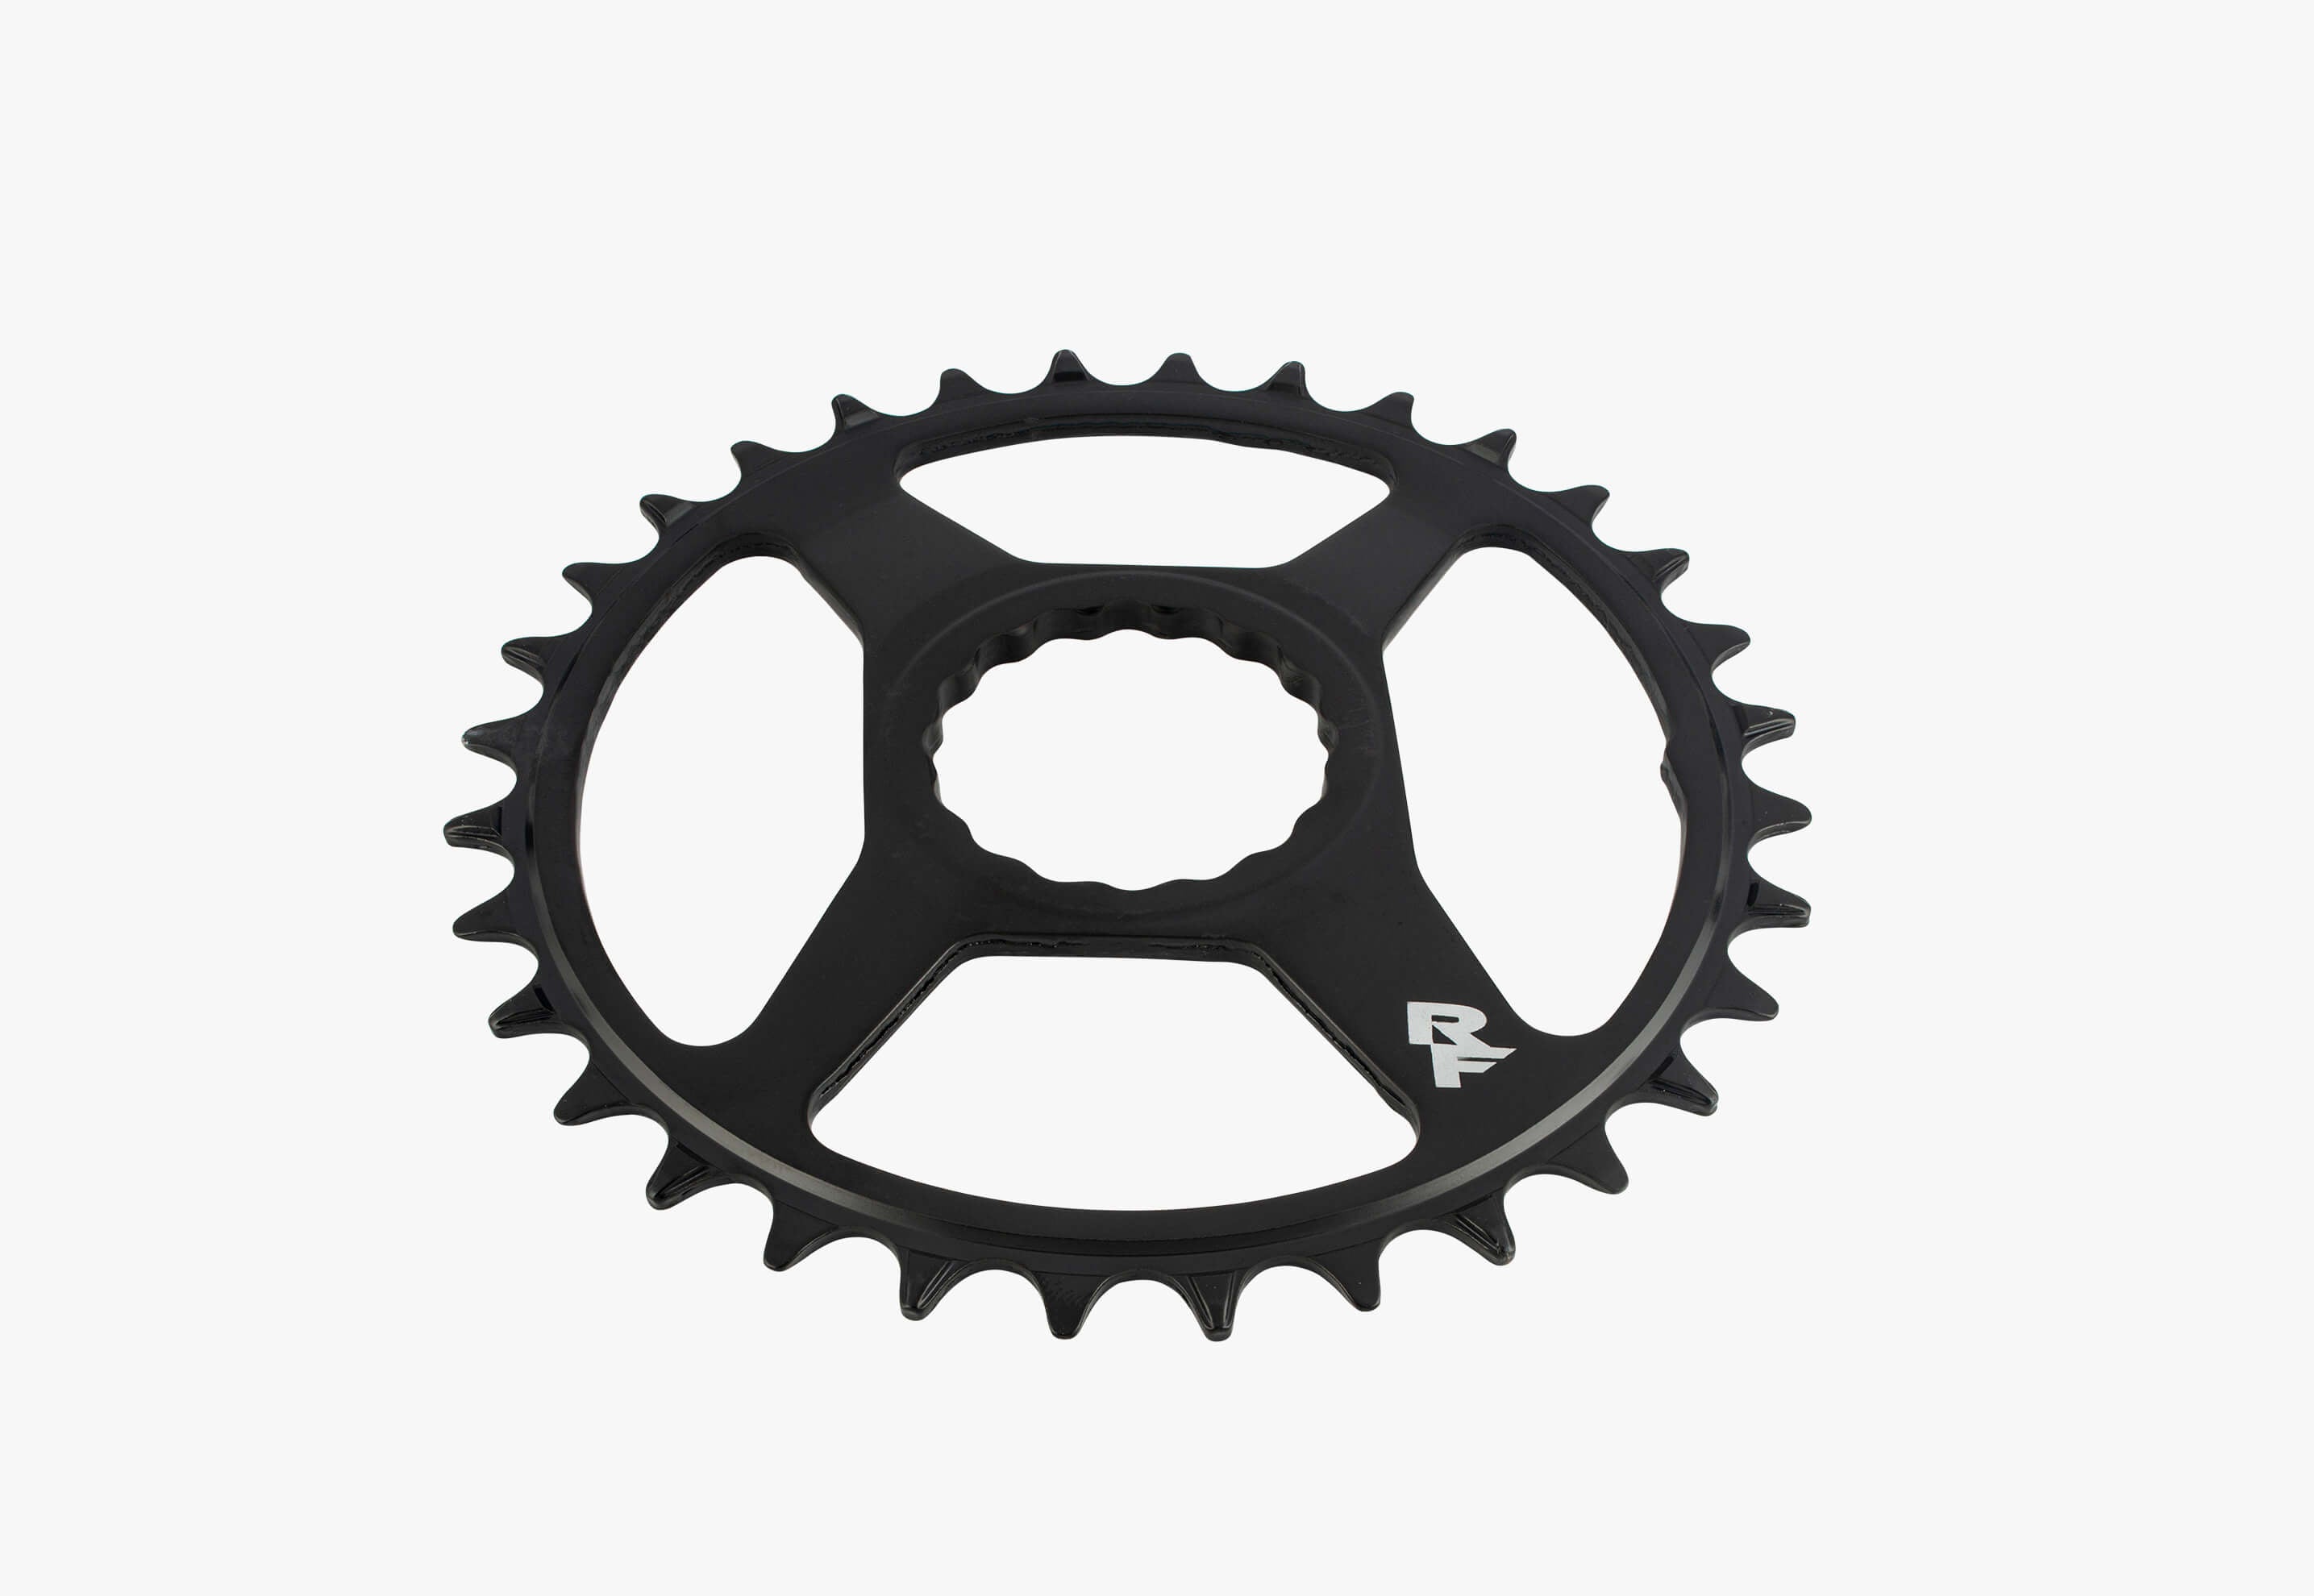 1x Chainring, Cinch Direct Mount, NW - Steel